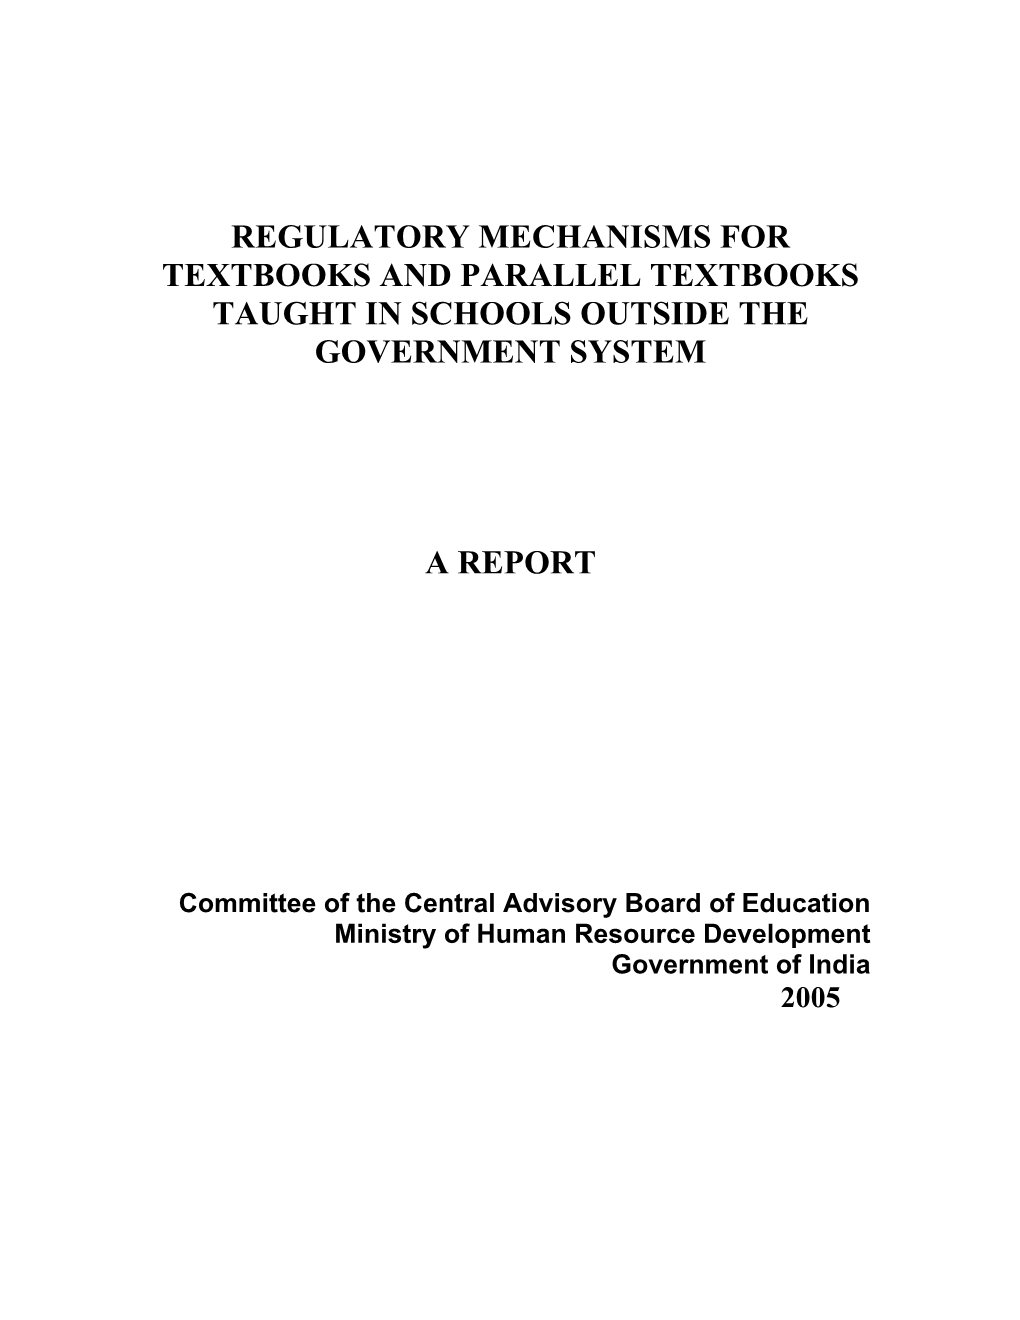 Regulatory Mechanisms for Textbooks and Parallel Textbooks Taught in Schools Outside the Government System